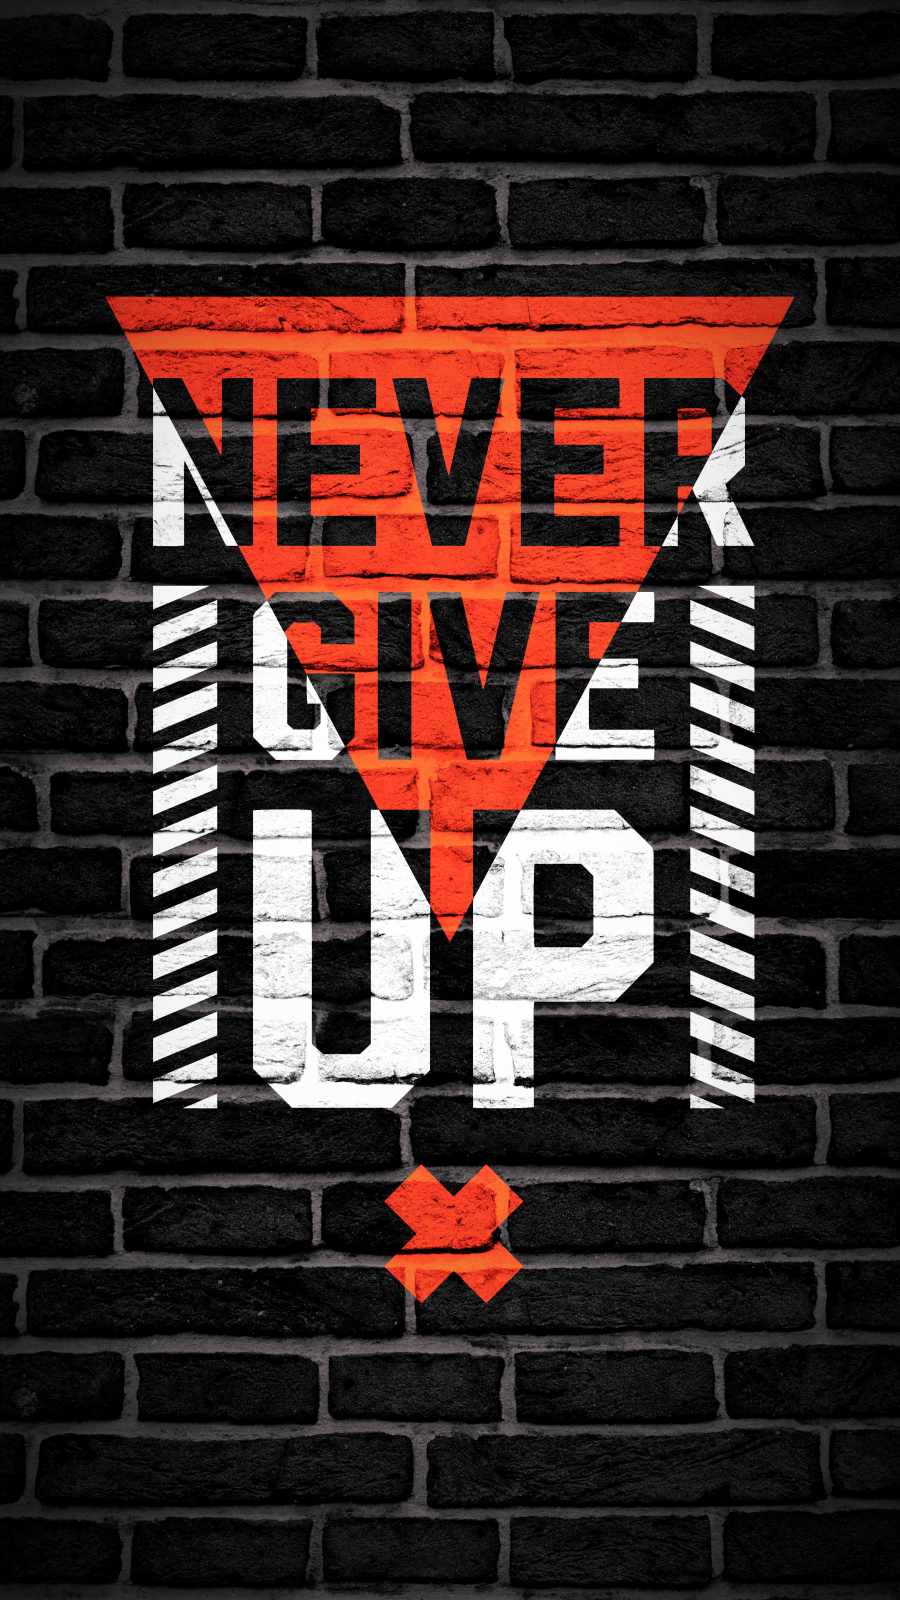 Never Give Up Wallpaper by CurtisWise on DeviantArt